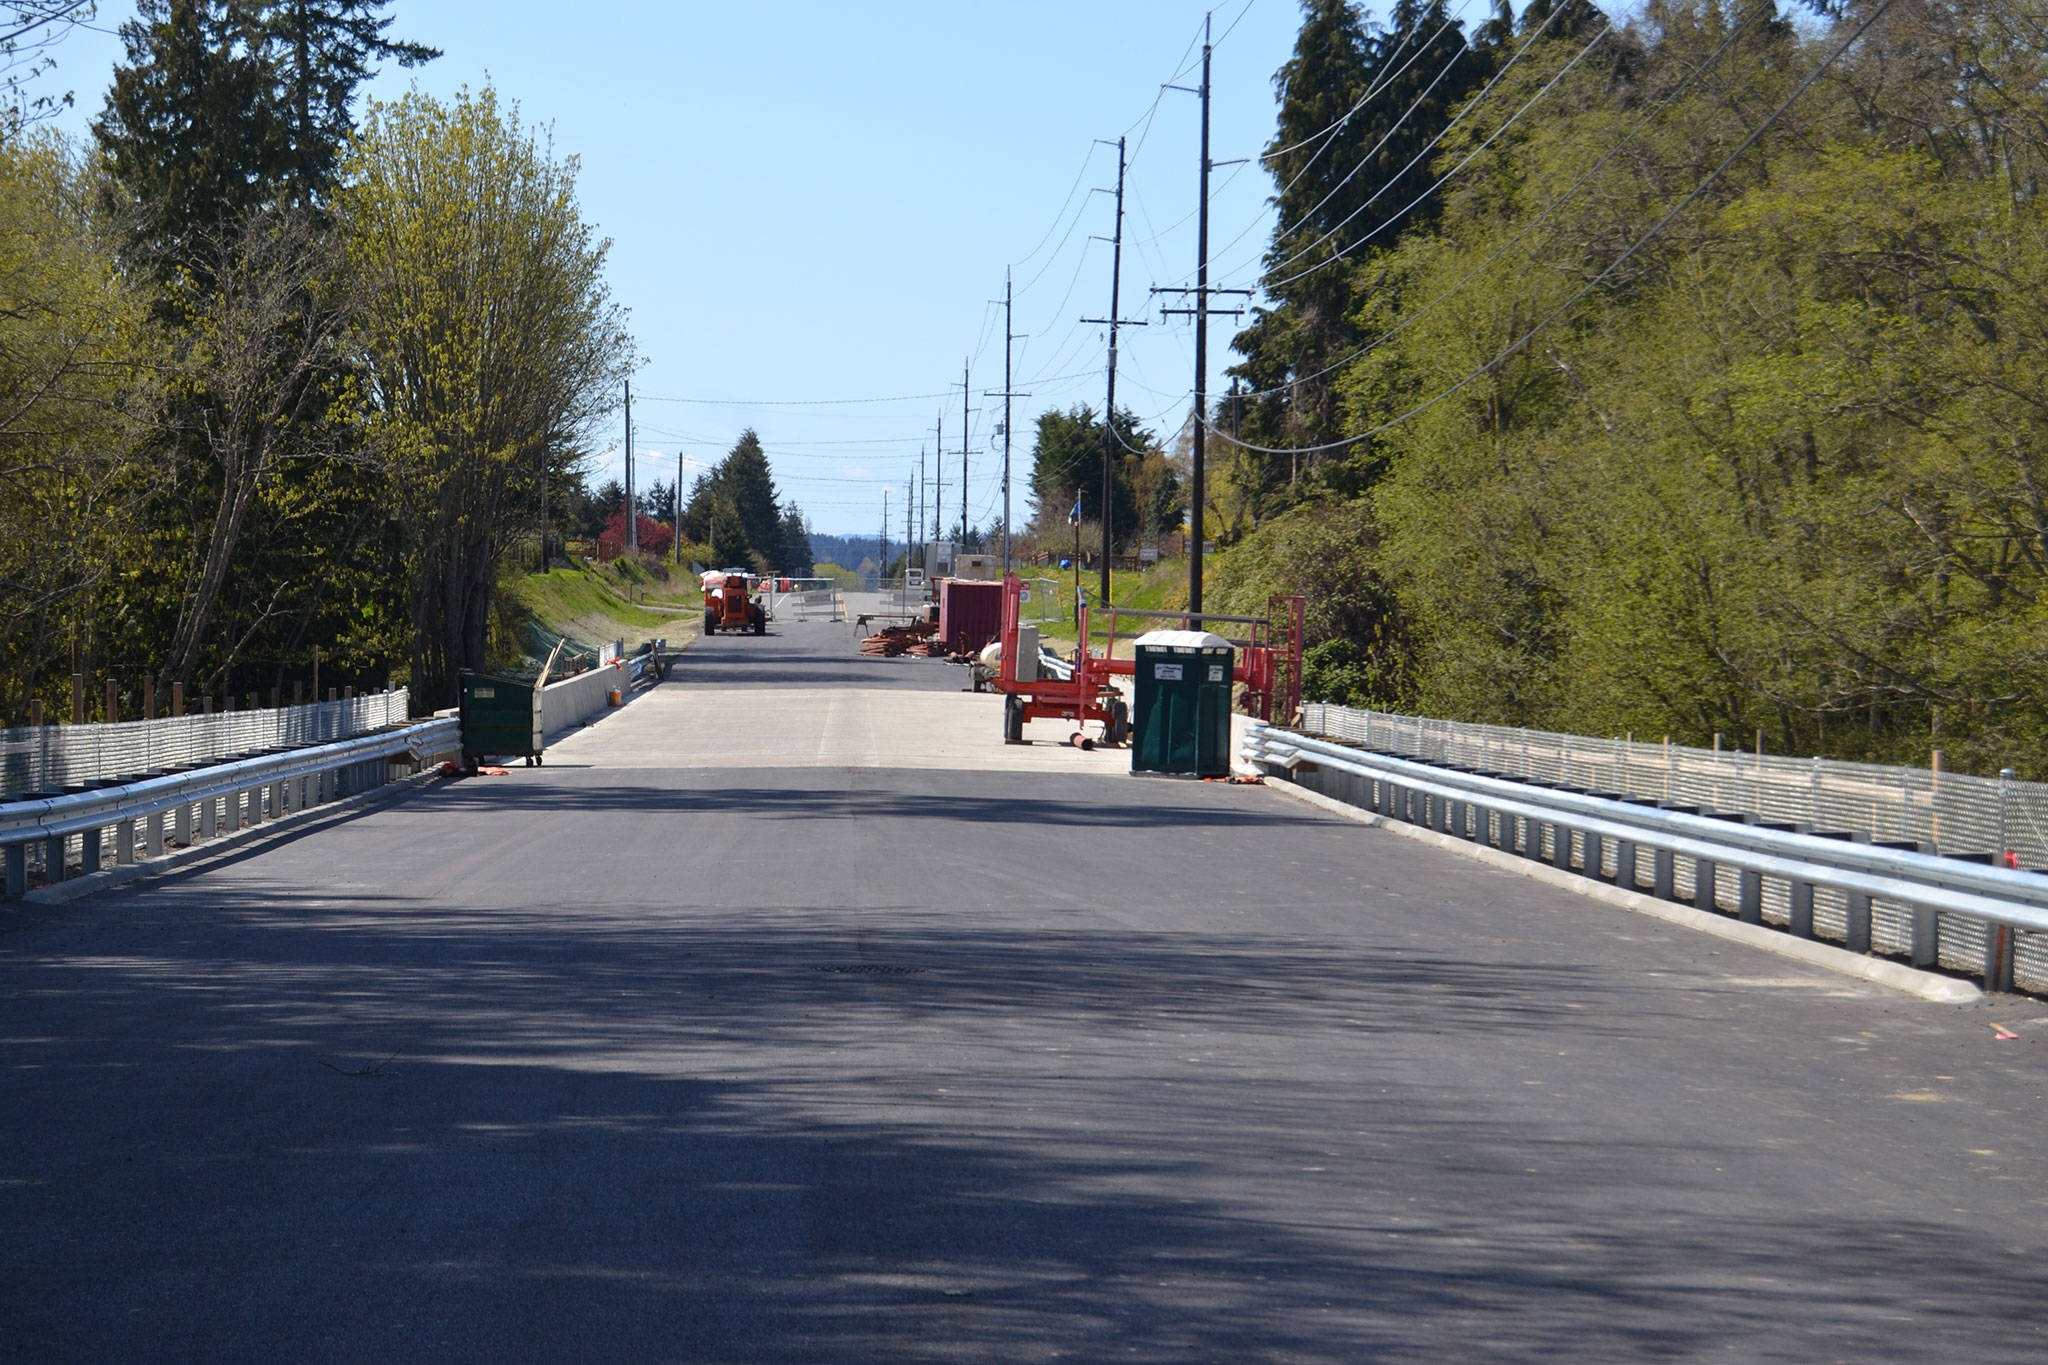 A community celebration is set for 10 a.m. Saturday, April 28, on the new McDonald Creek Bridge to celebrate it reopening tentatively on April 30. Sequim Gazette photo by Matthew Nash